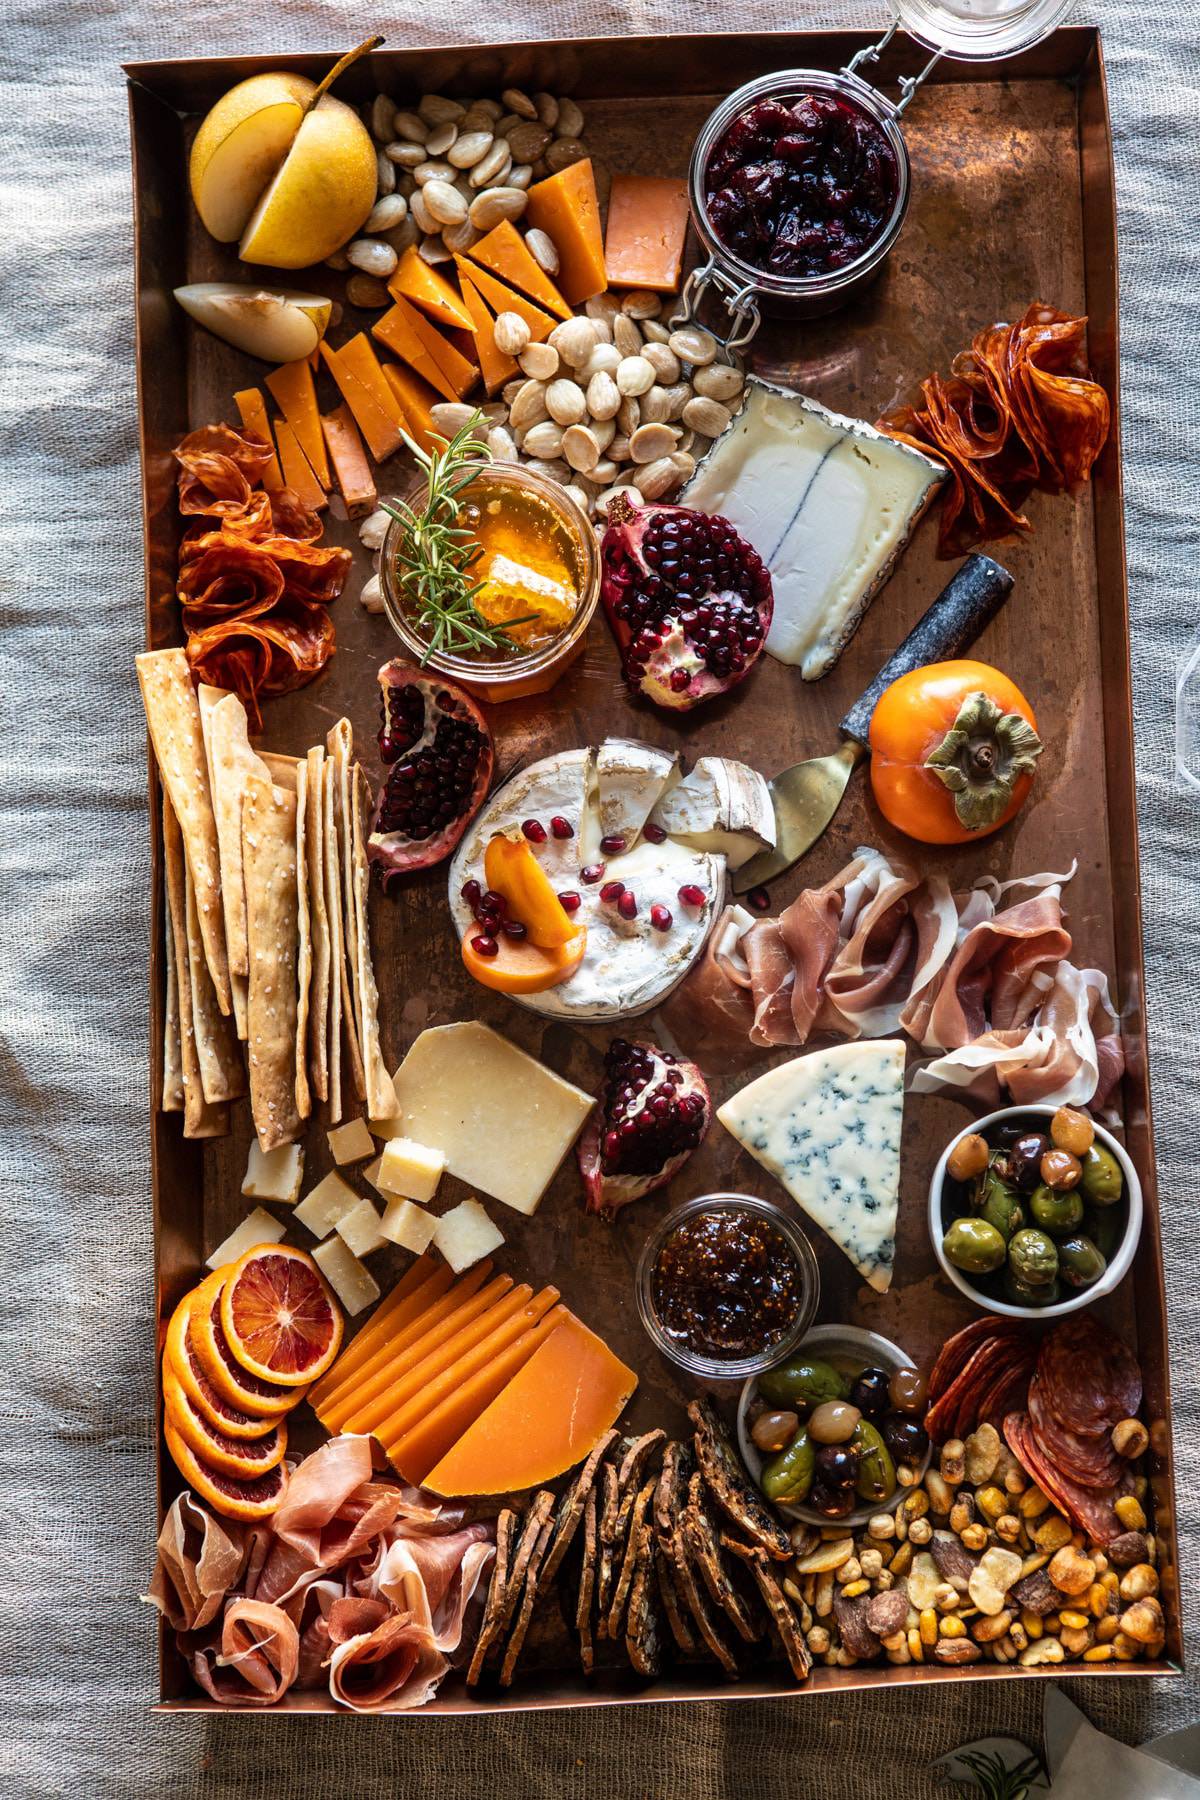 How-to-Make-an-Easy-Holiday-Cheese-Board-5.jpg